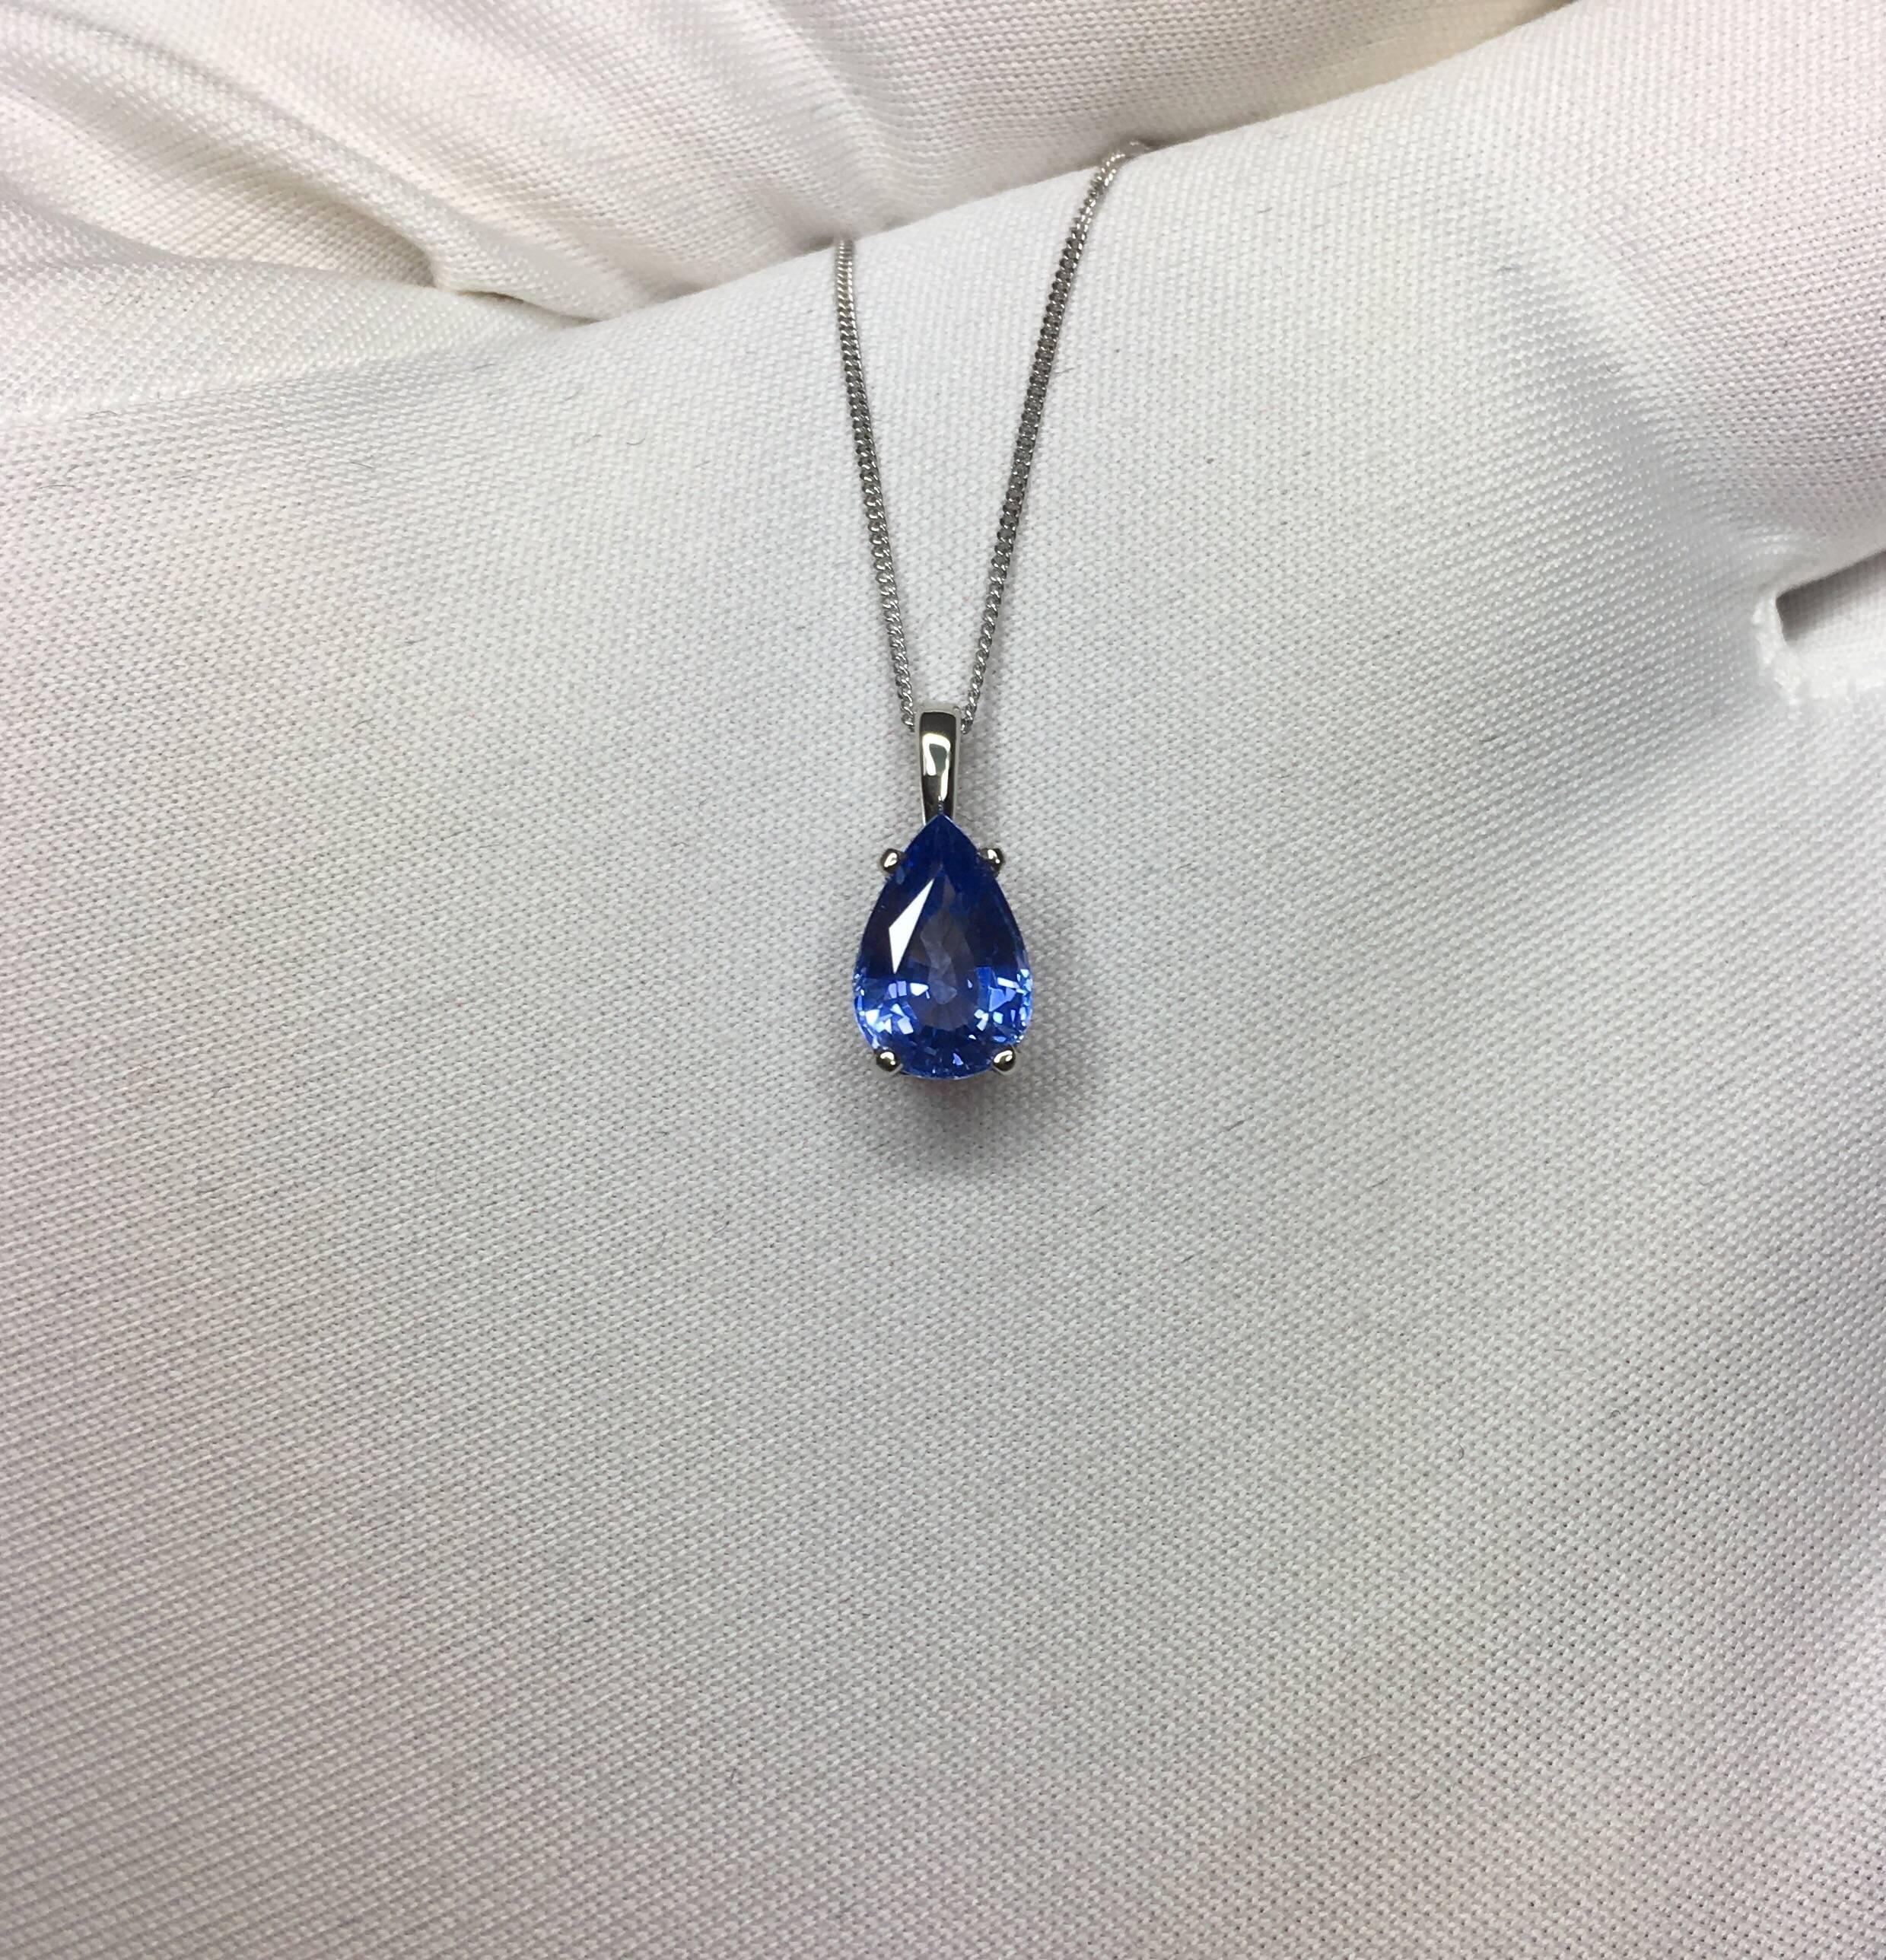 Beautiful natural 1.34 carat blue Ceylon Sapphire set in a fine 18k white gold solitaire pendant.

Stunning blue sapphire with vivid blue colour and excellent clarity. Very clean stone.

It also has an excellent pear/teardrop cut which shows lots of